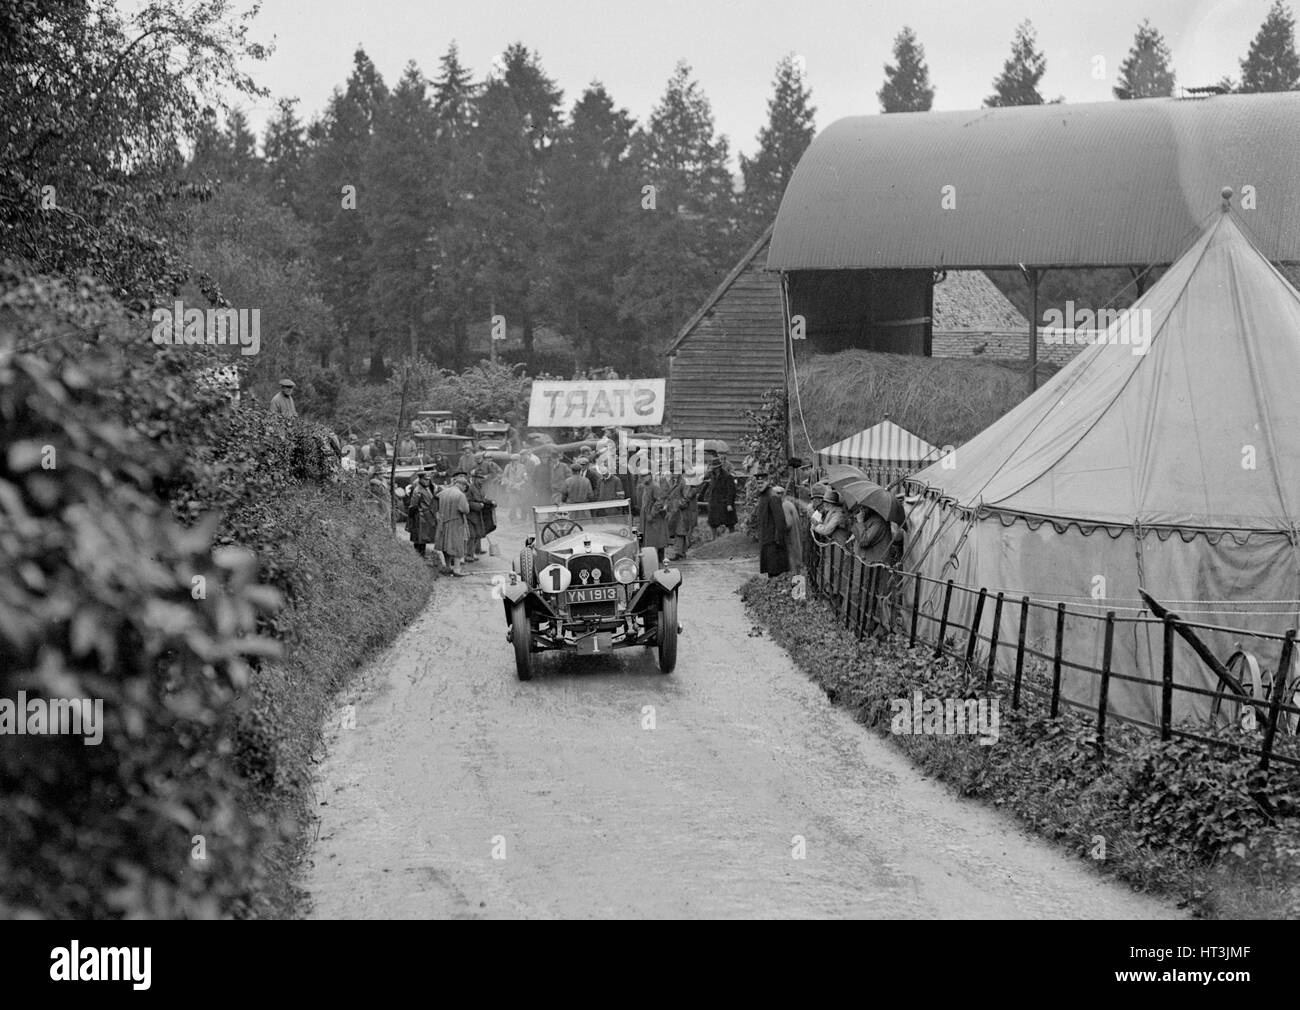 Vauxhall 30/98 of D Tinker competing in the MAC Shelsley Walsh Hillclimb, Worcestershire, 1927. Artist: Bill Brunell. Stock Photo